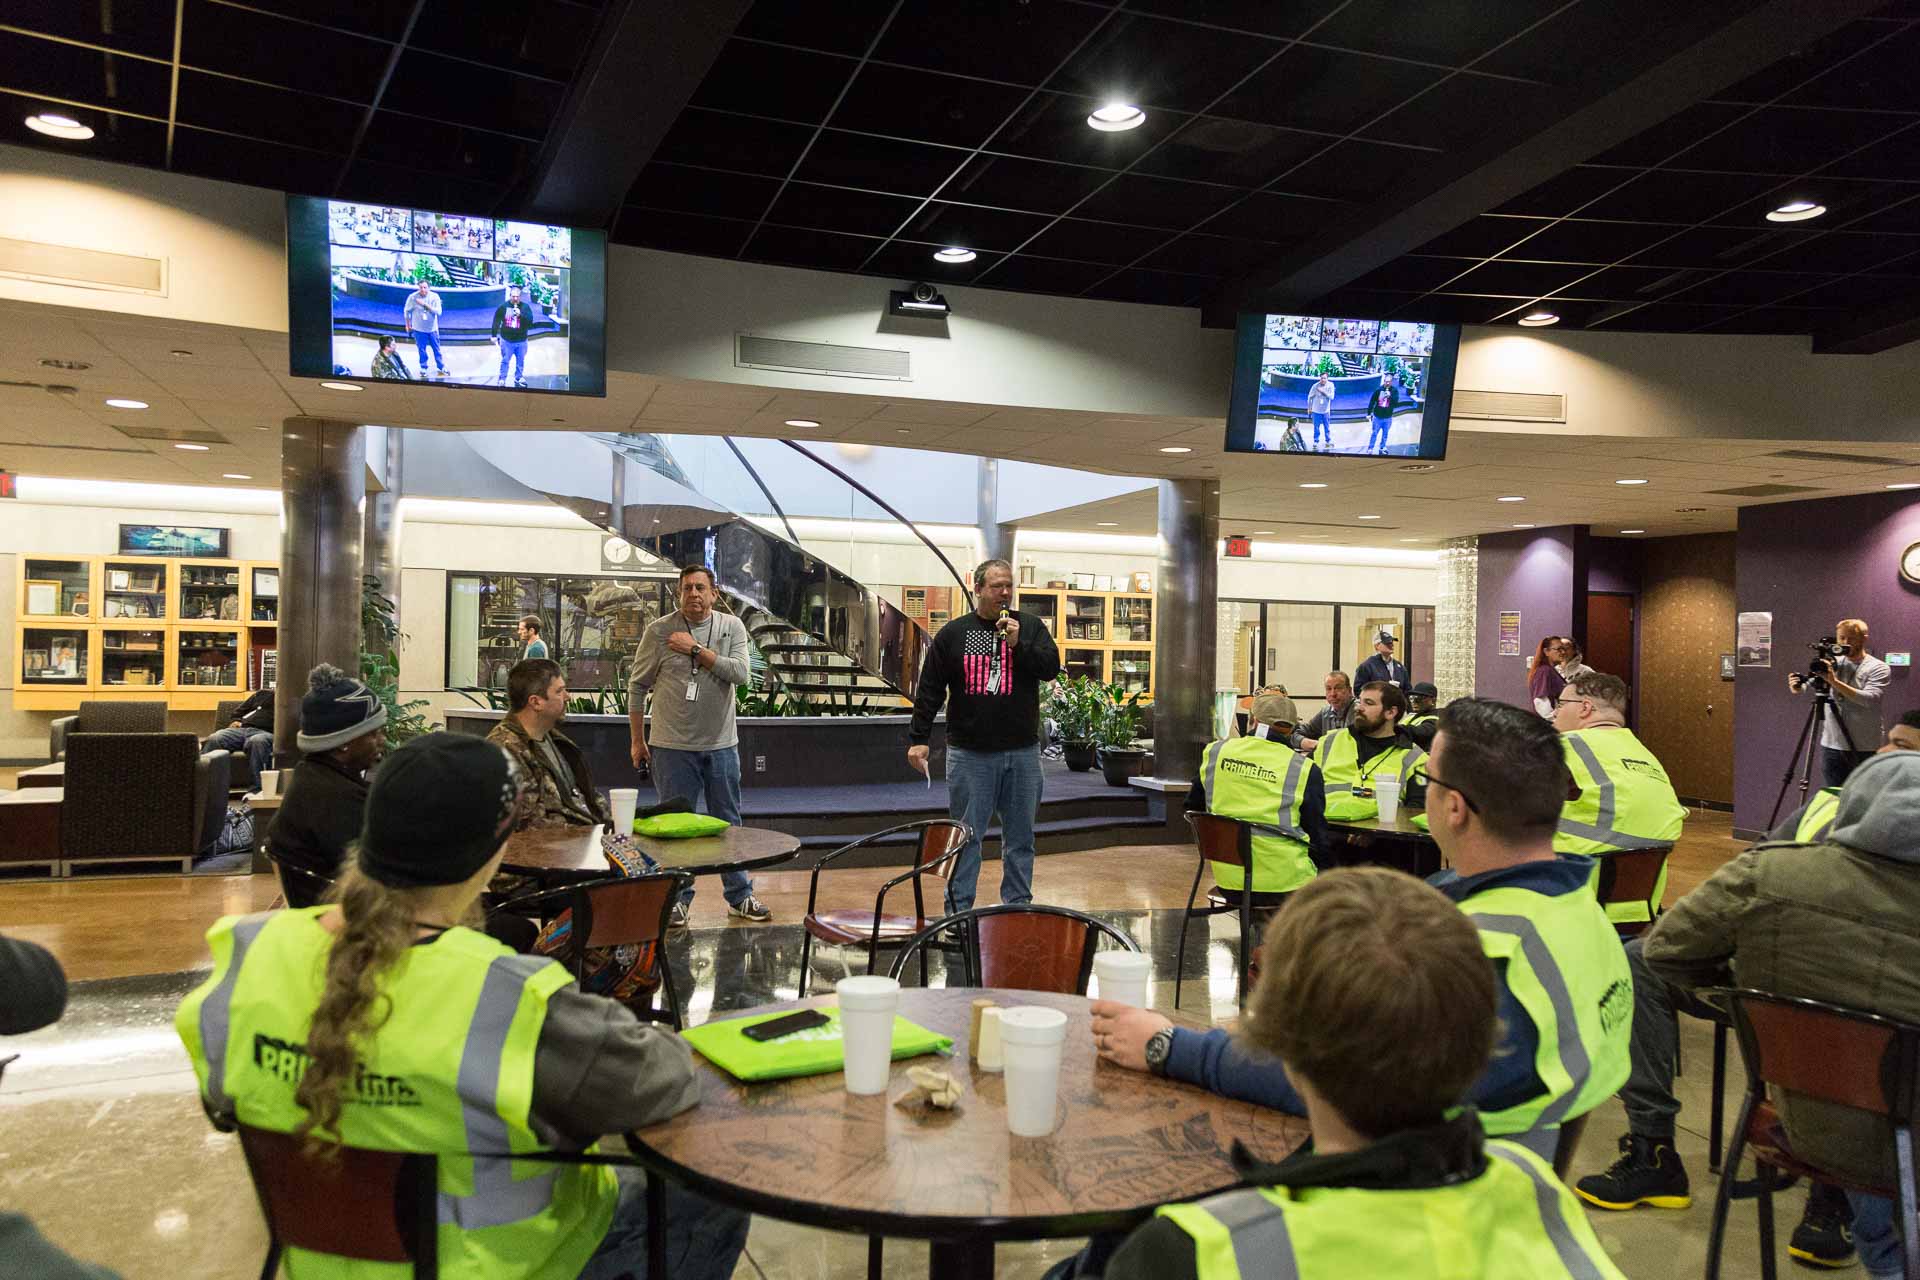 A Prime Inc. associate speaking to his team in a cafeteria area who are all wearing bright green safety vests.